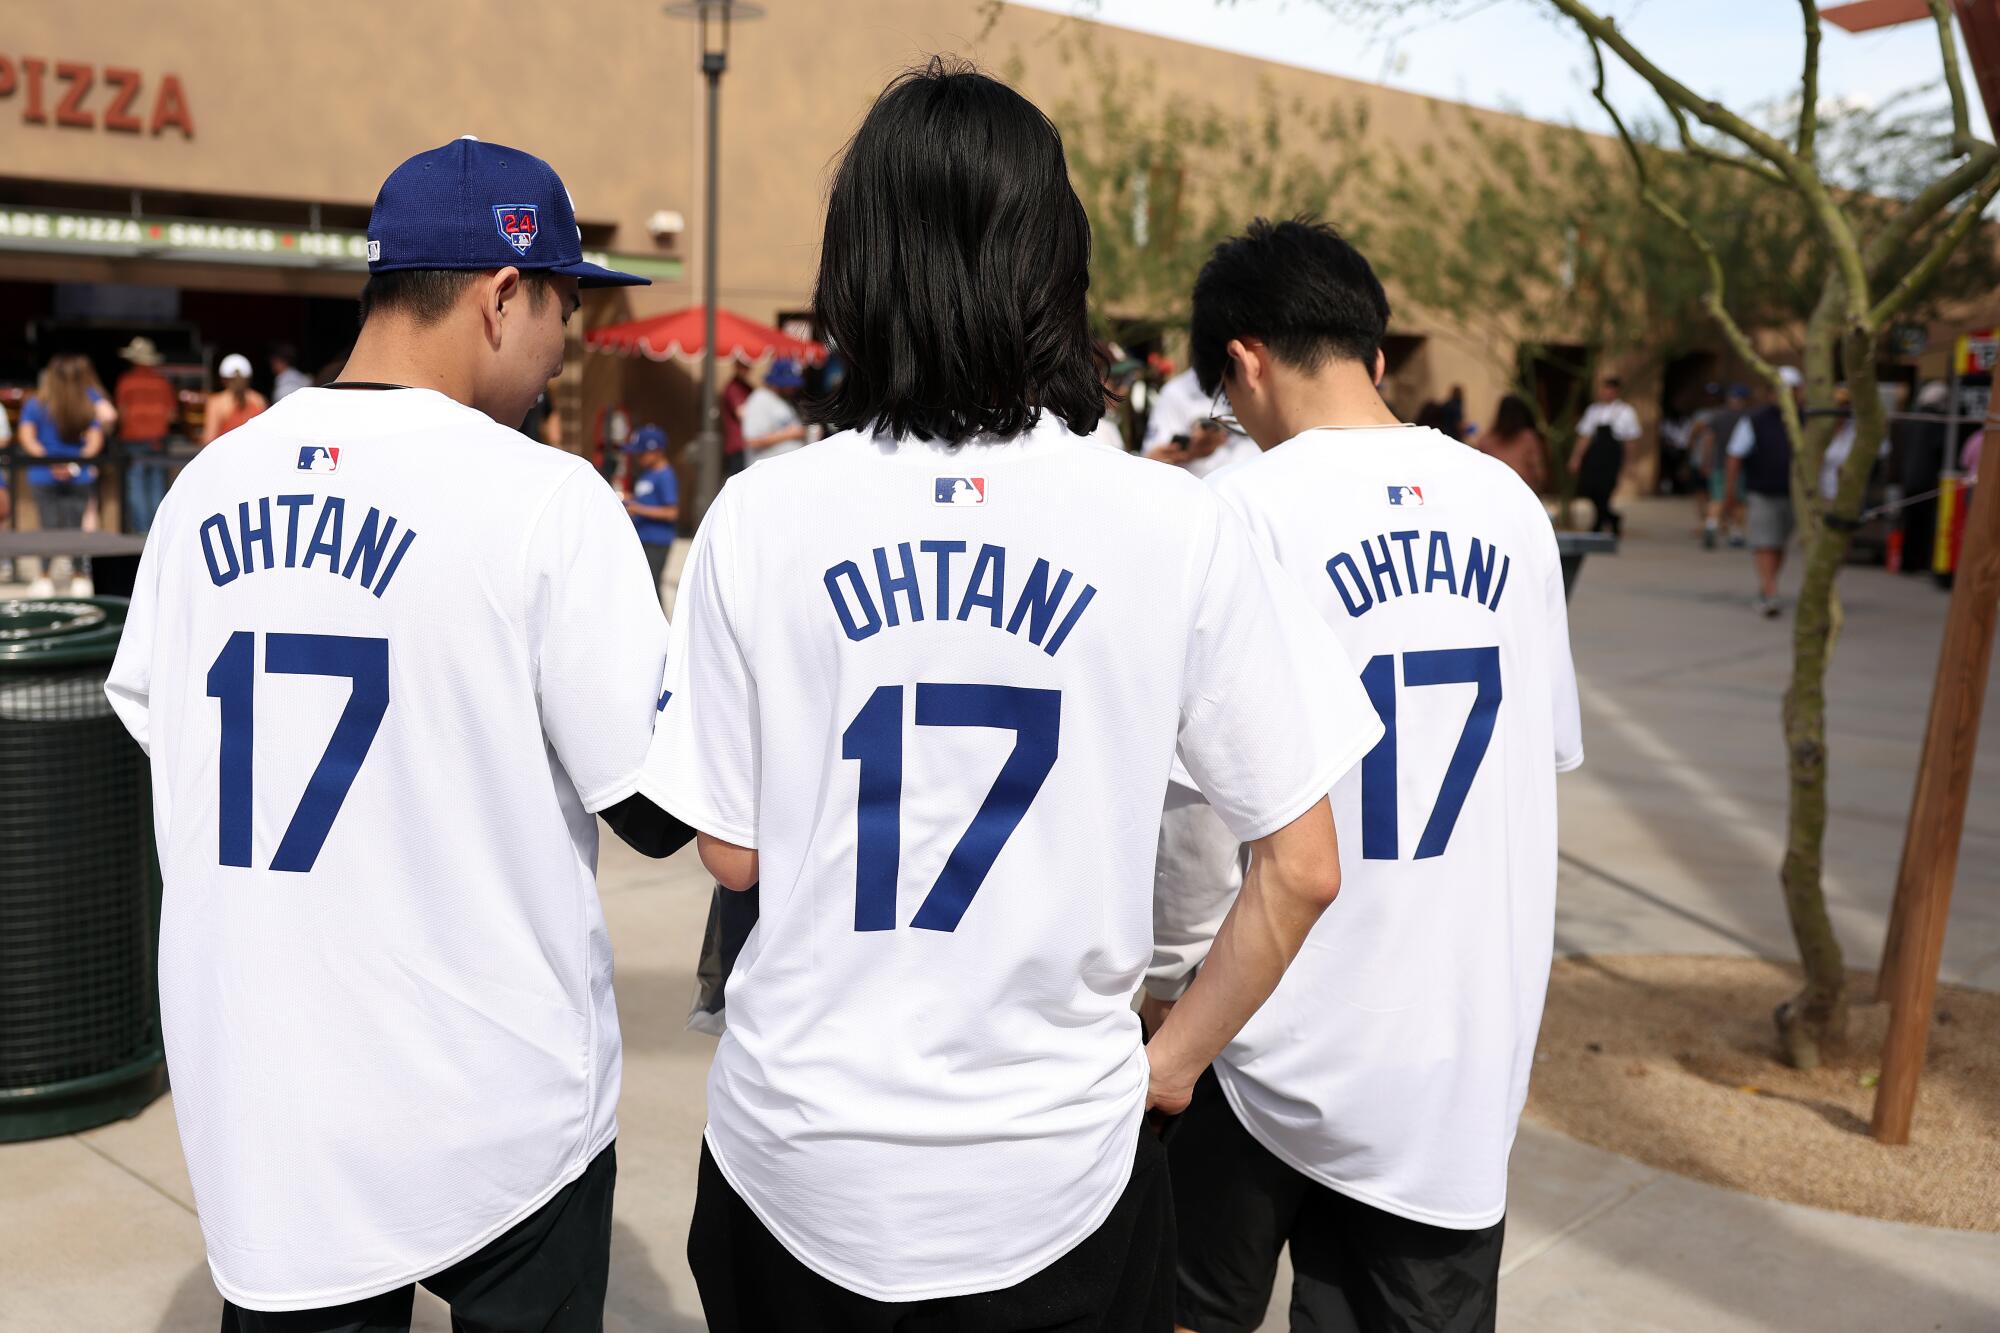 Fans wearing Shohei Ohtani jerseys arrive at Camelback Ranch for a game between the Dodgers and Chicago White Sox.